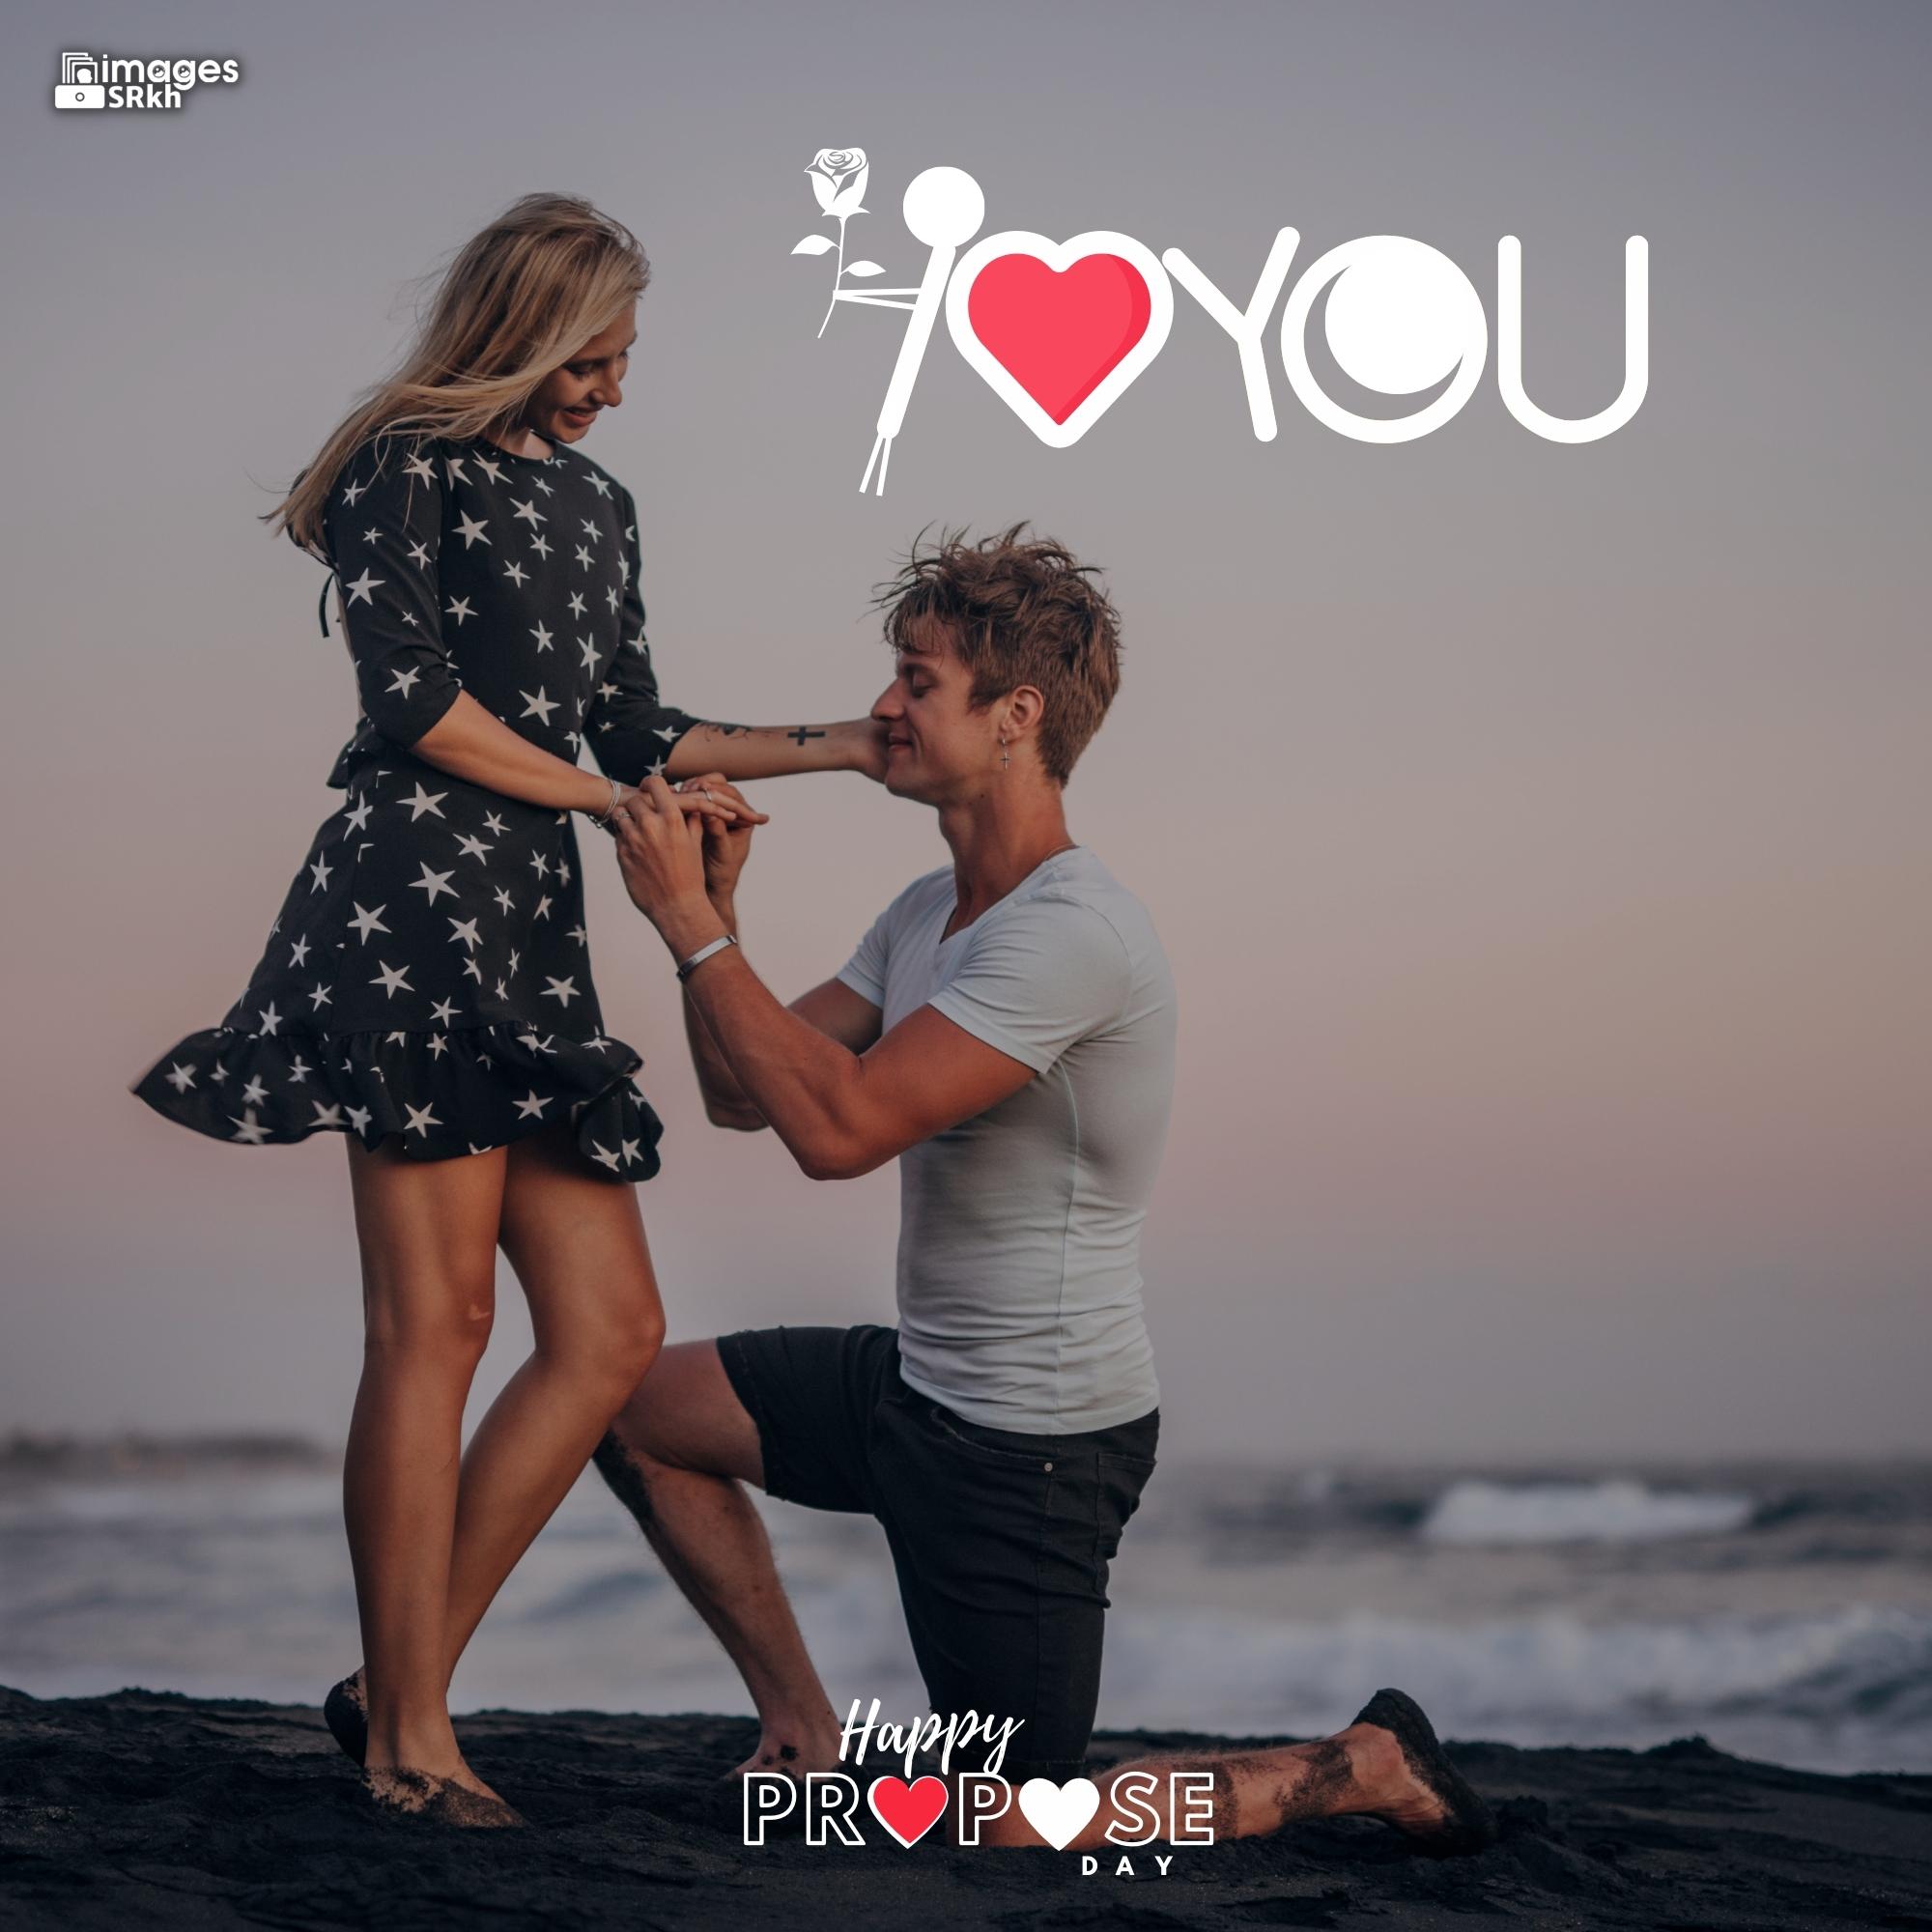 Happy Propose Day Images | 319 | I LOVE YOU